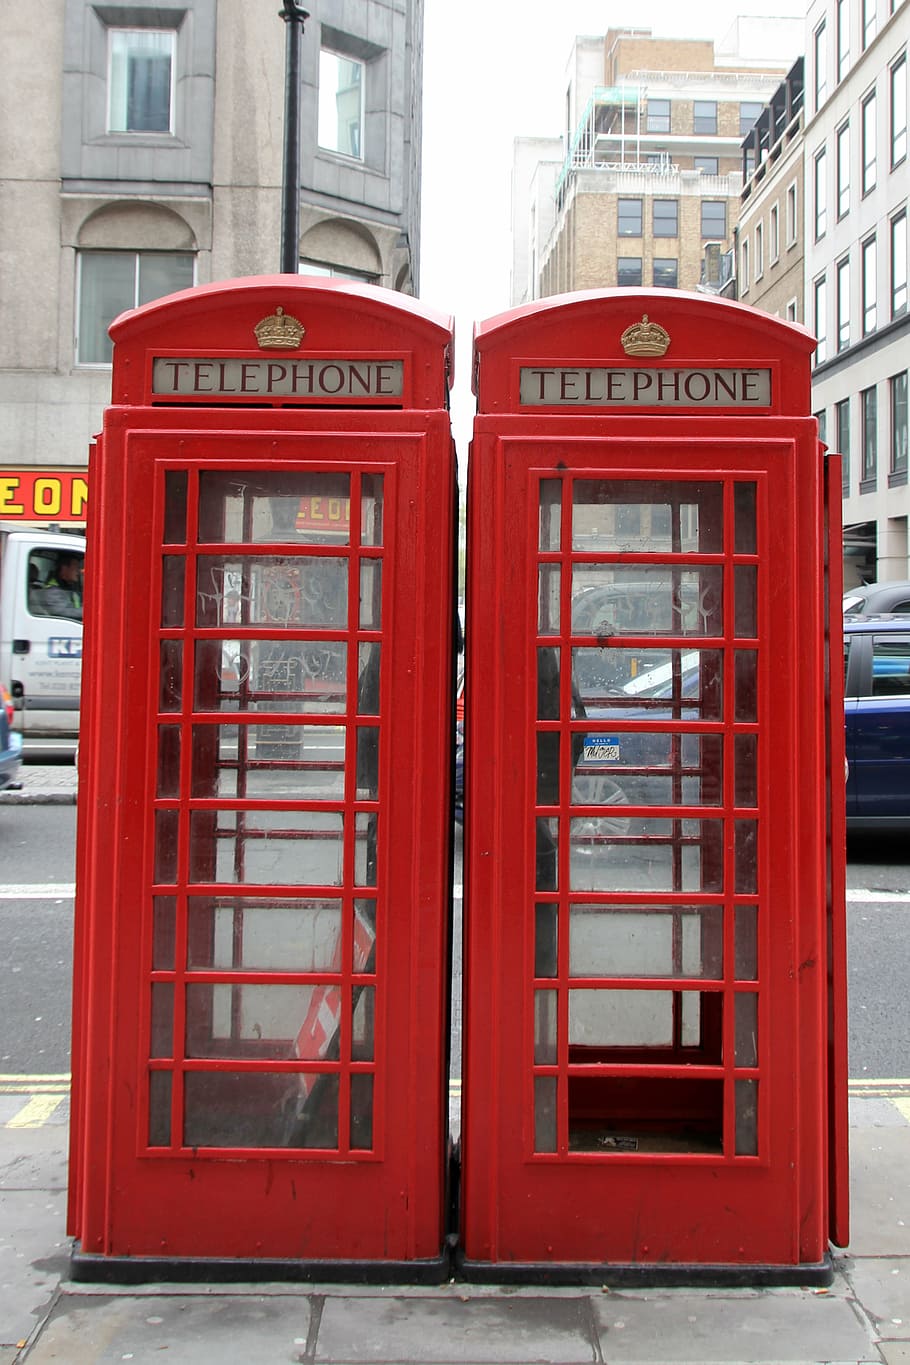 phone booth, red, london, dispensary, england, telephone house, red telephone box, phone, call, payphone